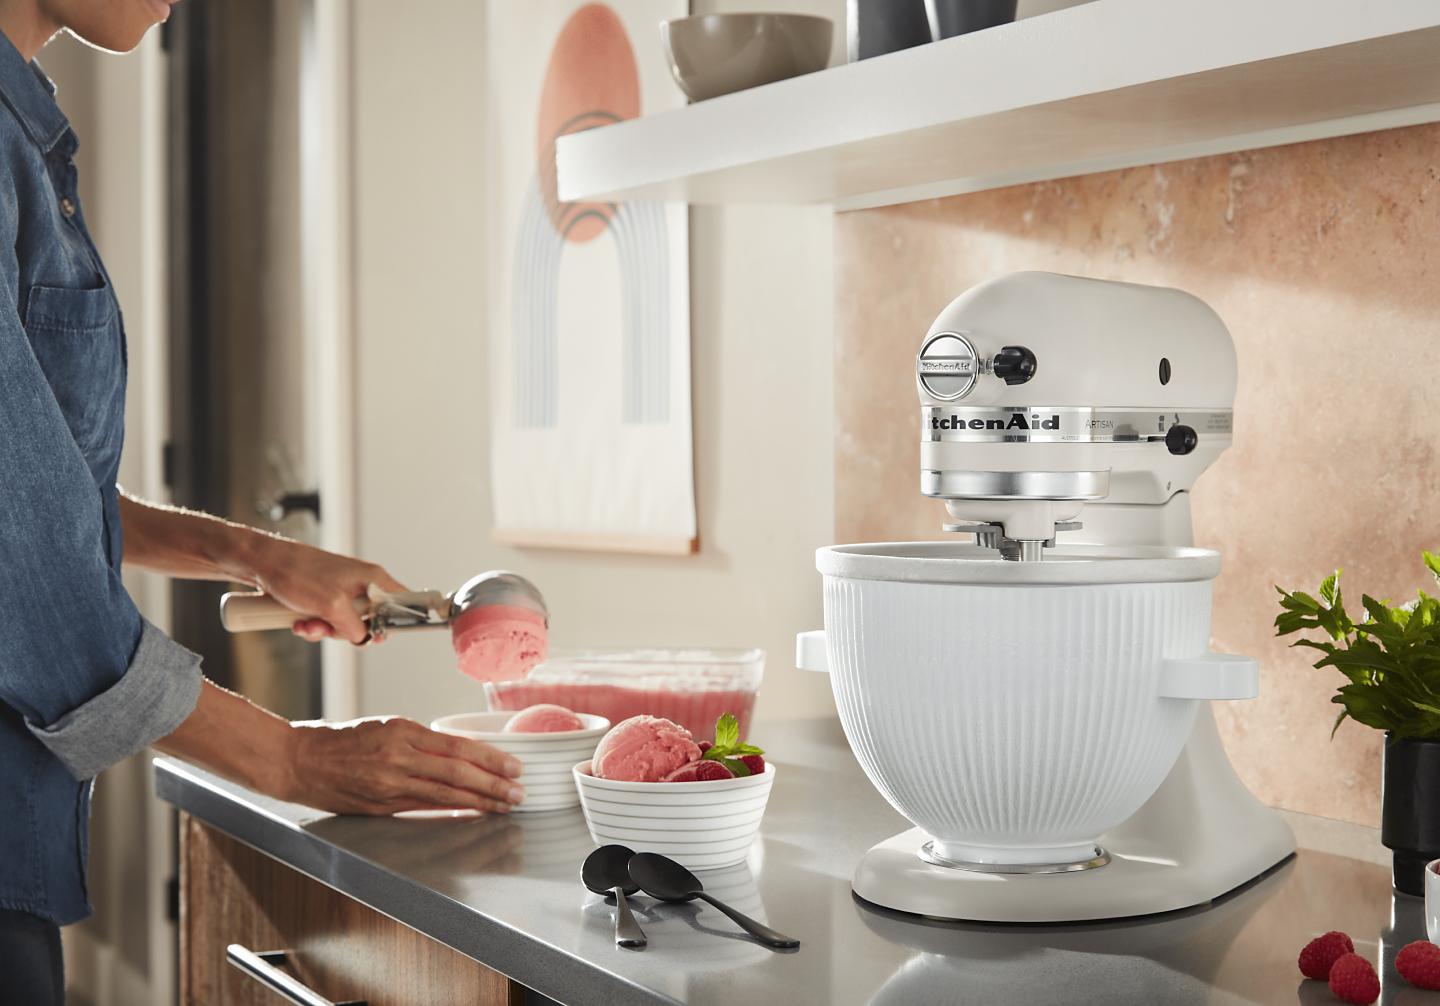  Woman scooping ice cream into bowls next to stand mixer with KitchenAid®  Ice Cream Maker Attachment